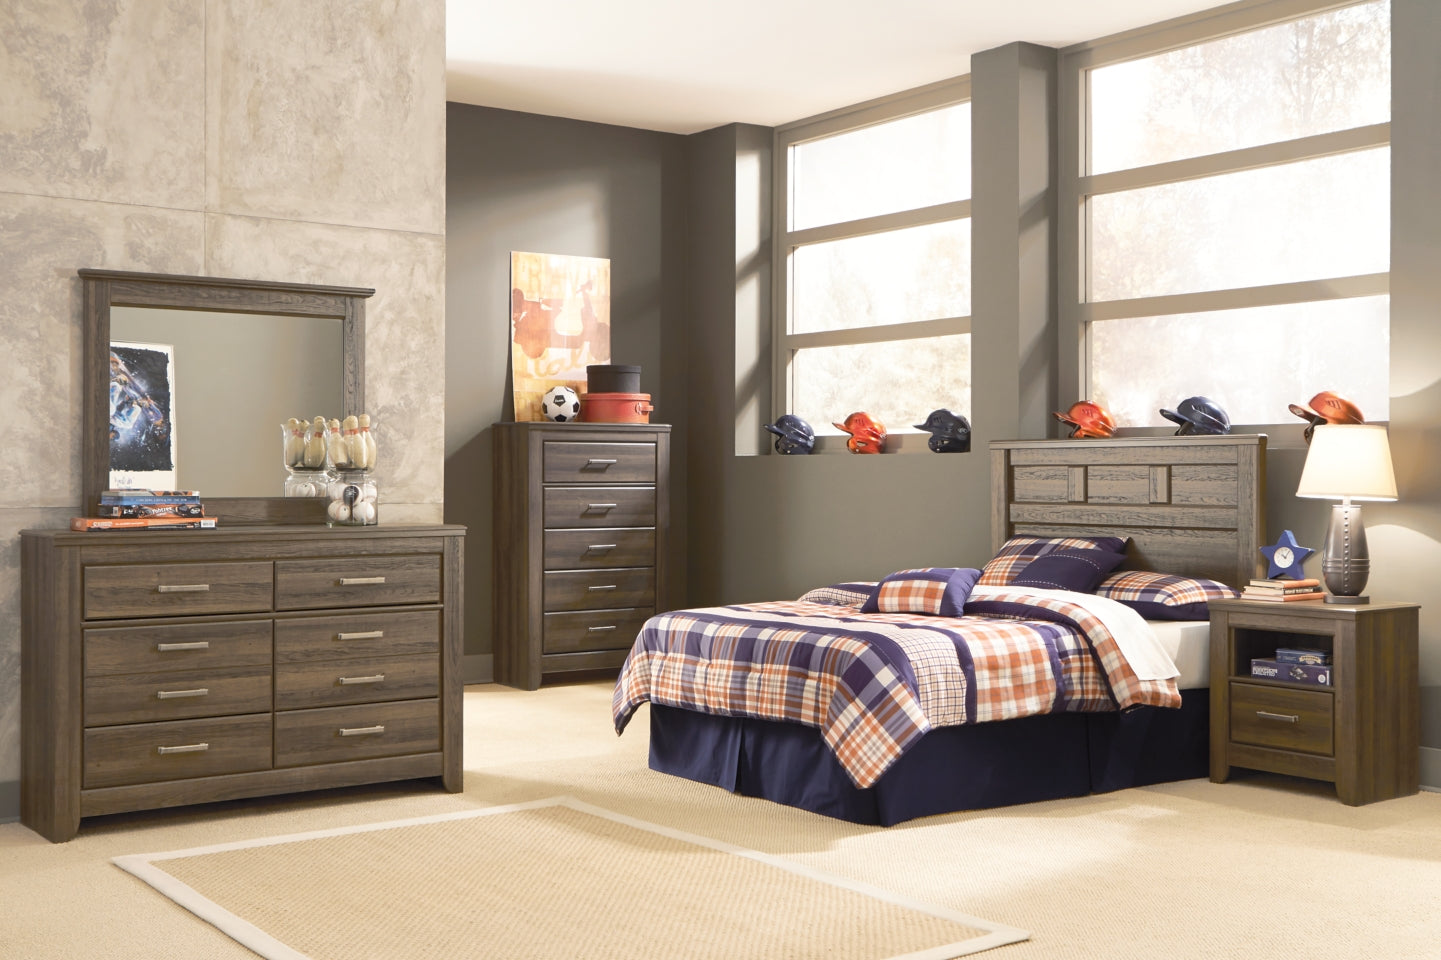 Juararo Chest of Drawers - furniture place usa